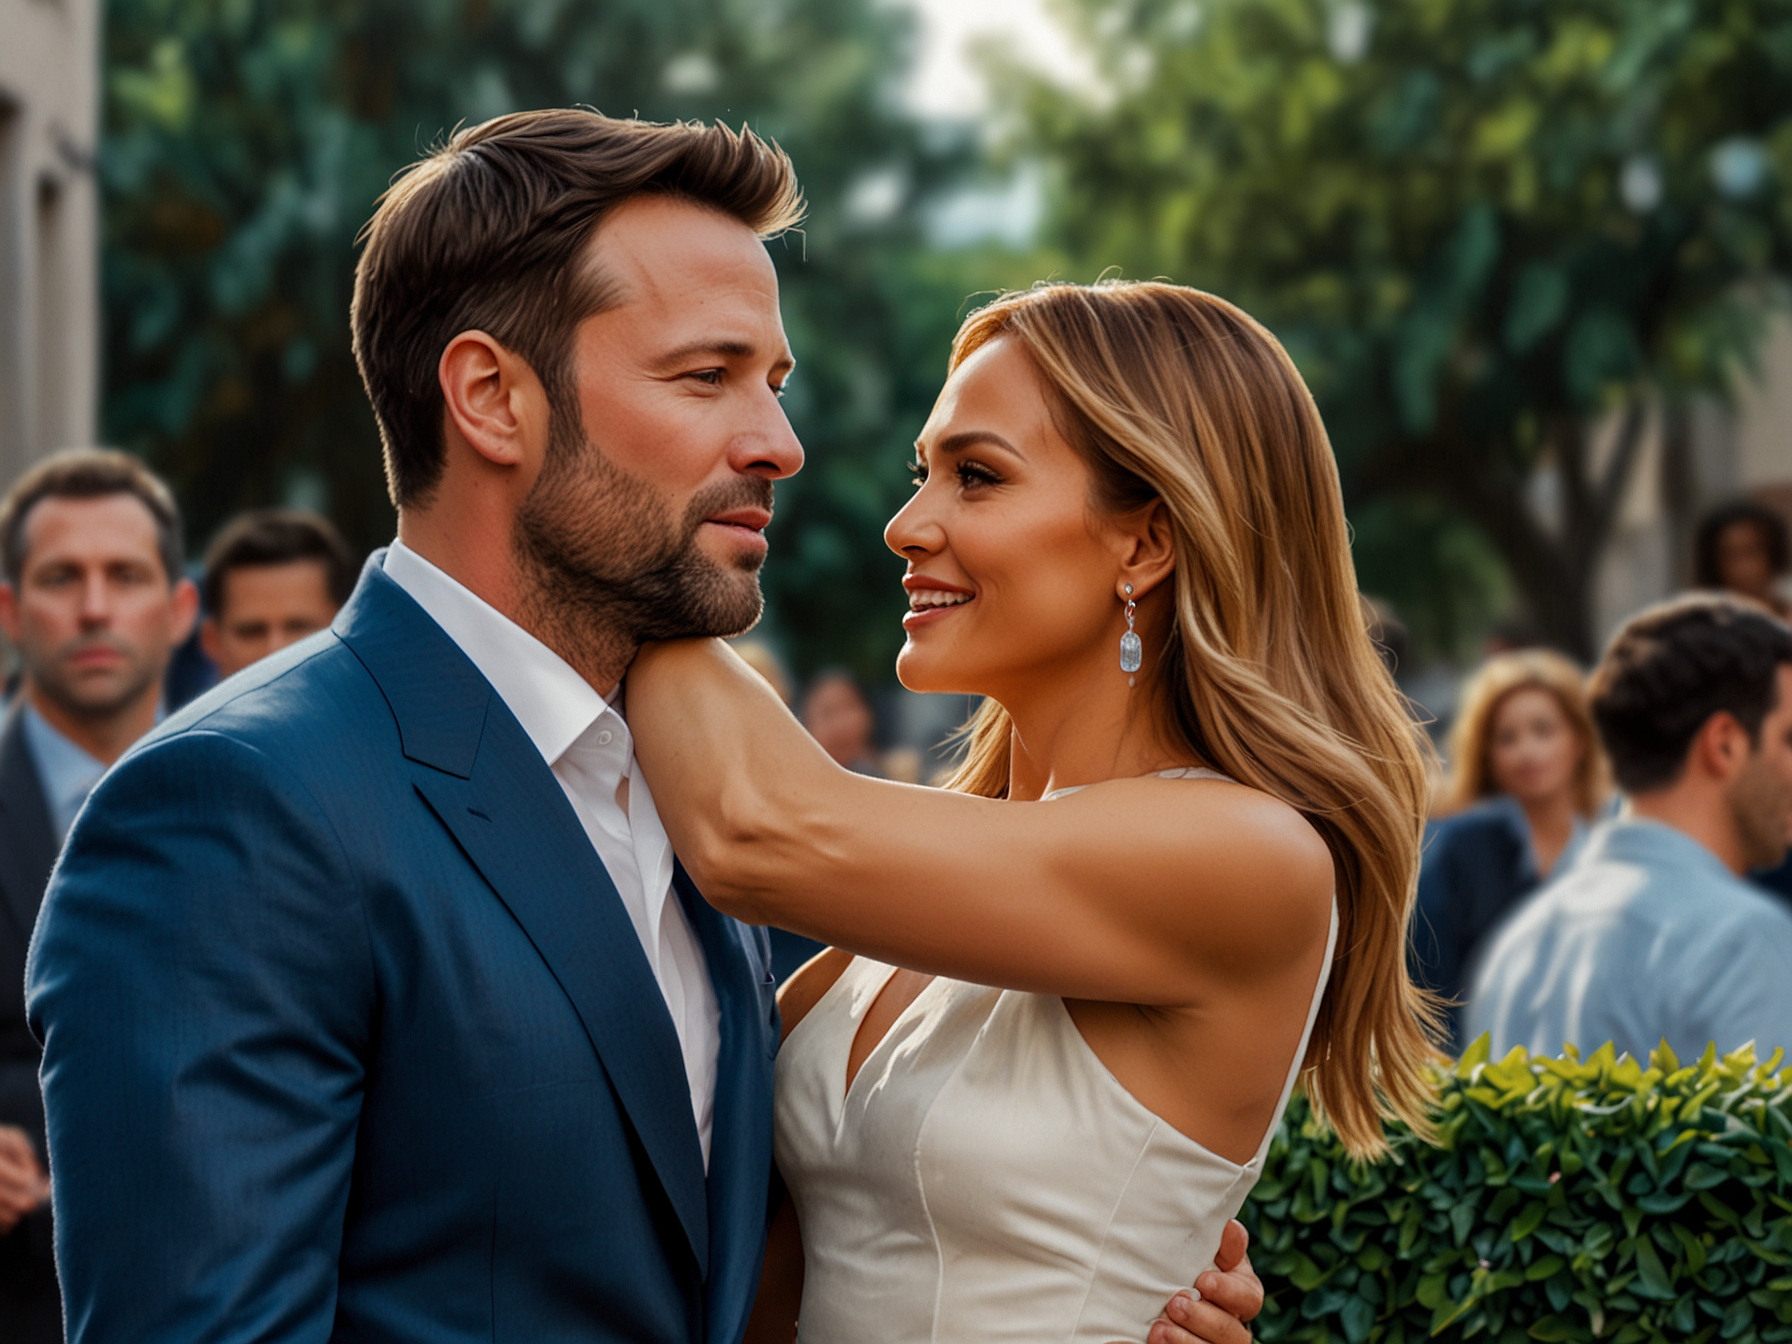 A candid photo of Jennifer Lopez and Ben Affleck, capturing their public reunion and the media attention surrounding their rekindled romance, often dubbed 'Bennifer 2.0.'